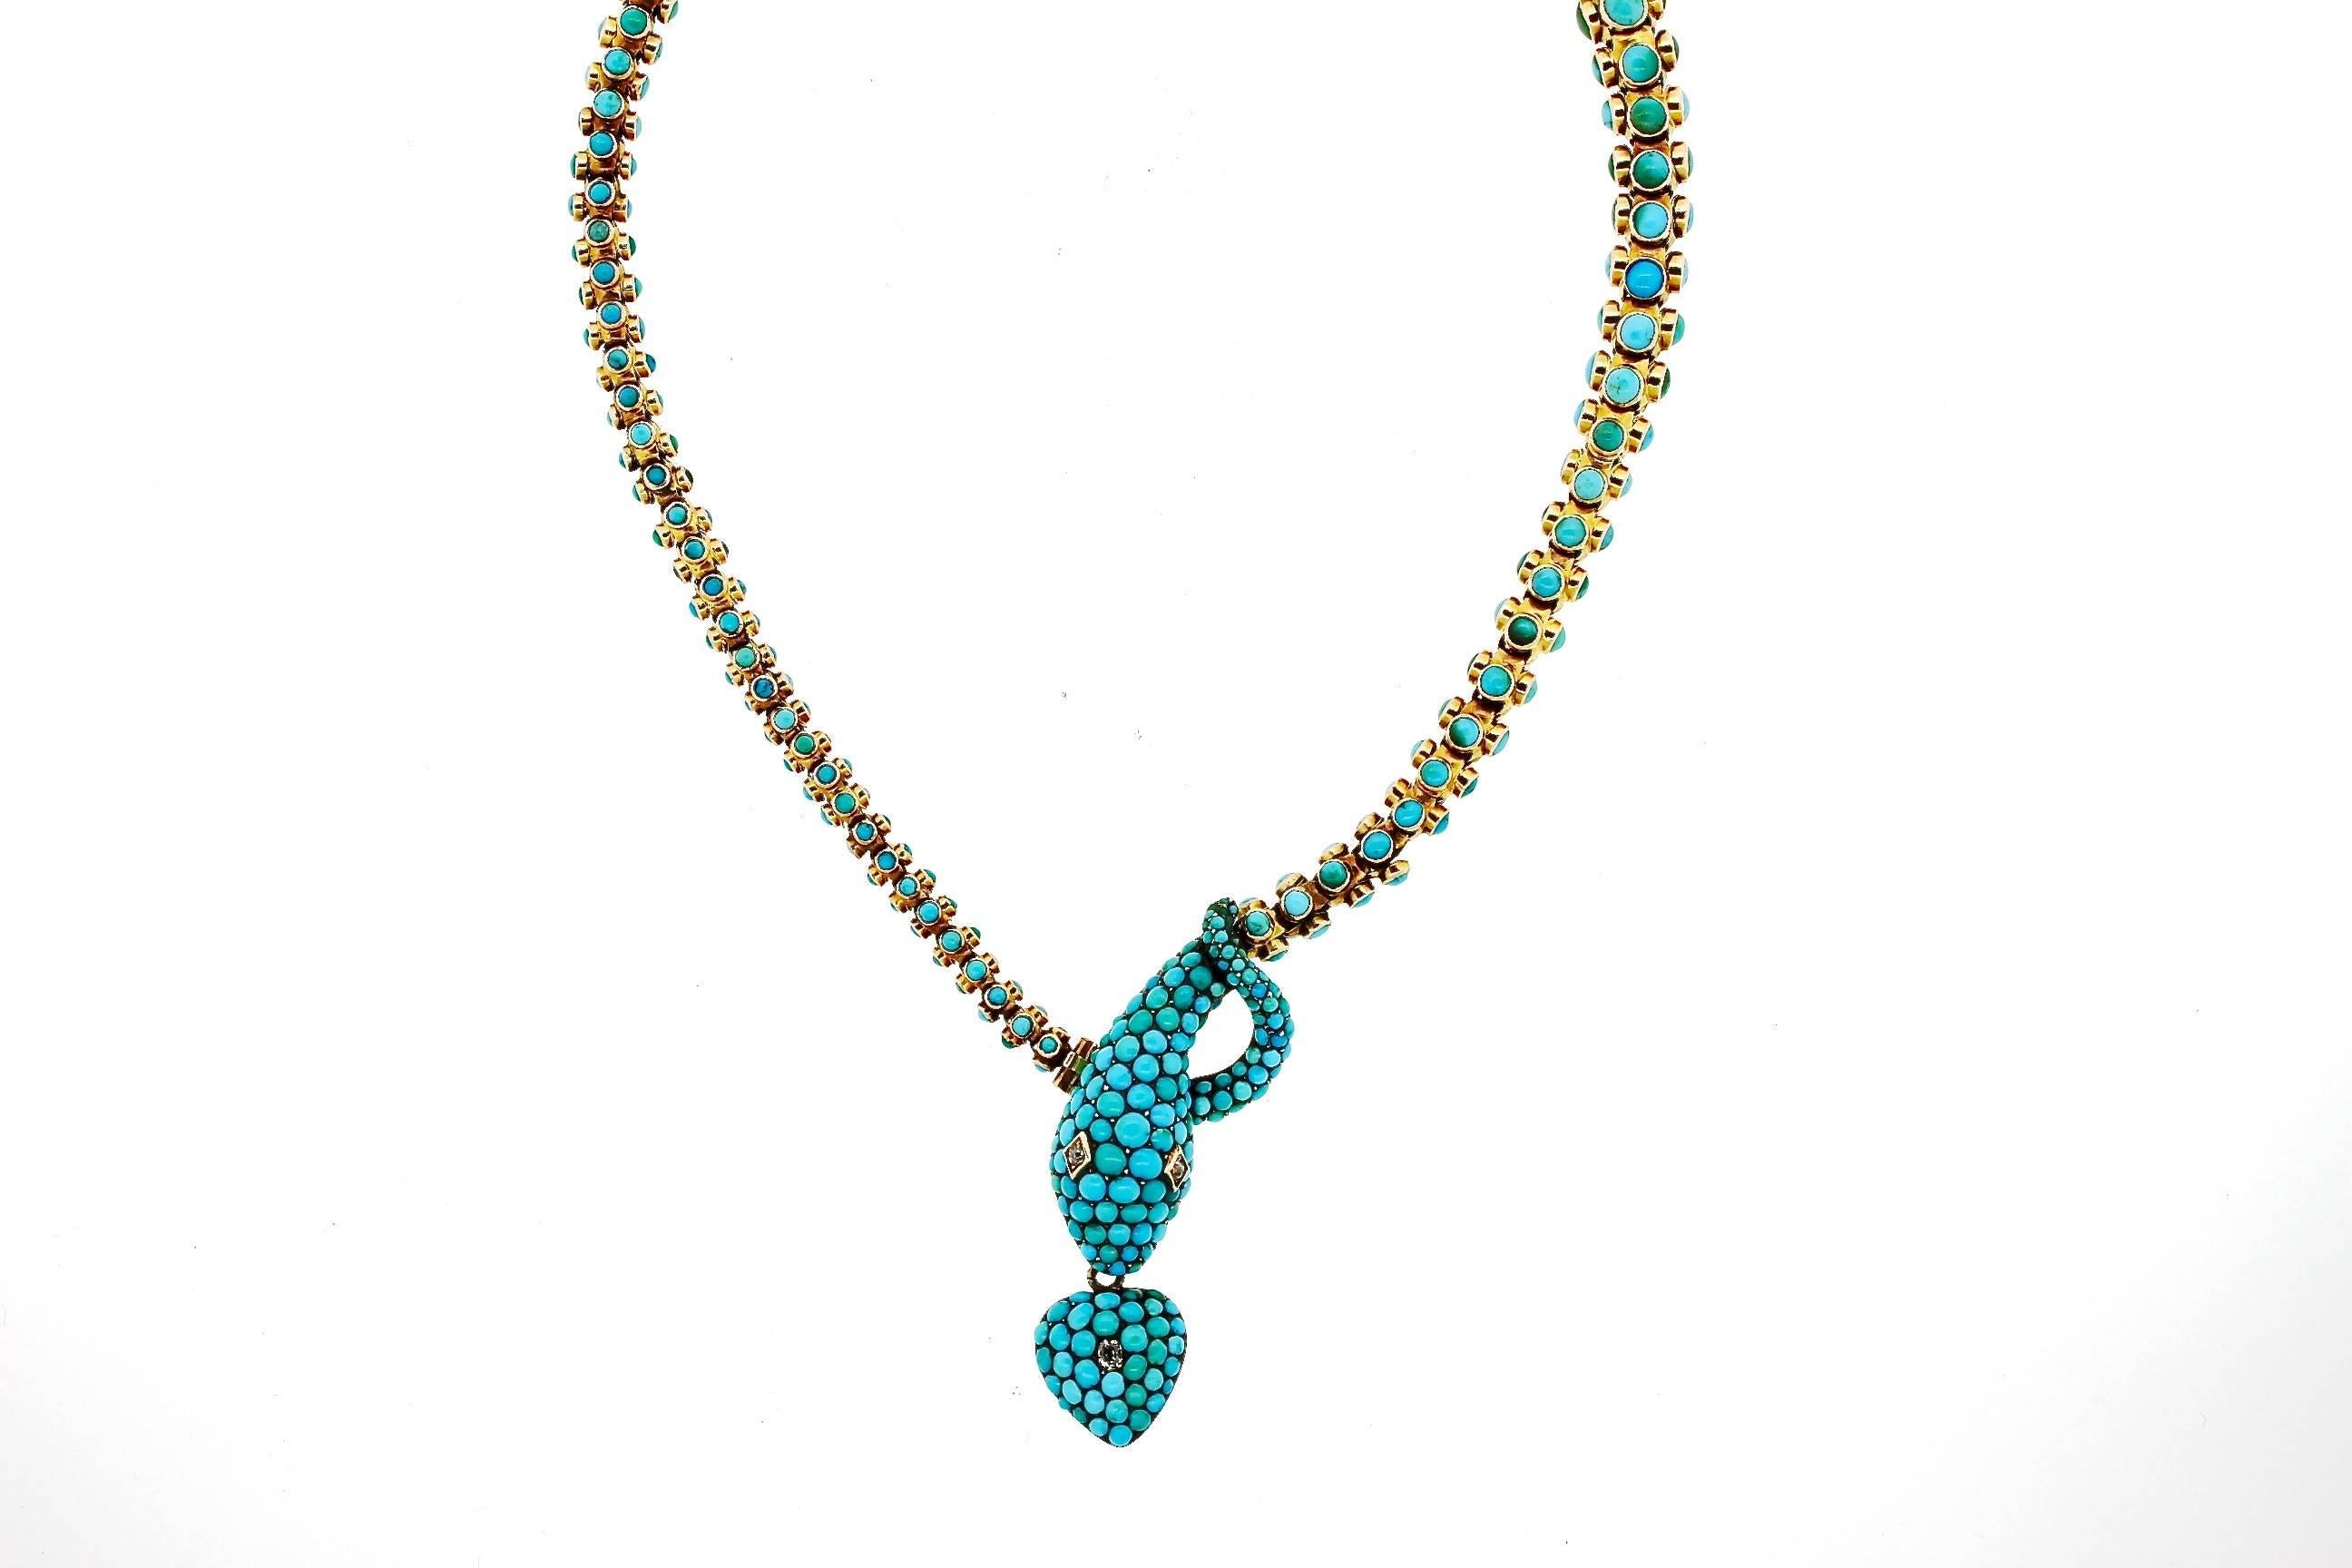 Antique turquoise gold snake necklace with a heart pendant, circa 1880. Serpents have long been depicted in jewelry for centuries.  During the reign of Queen Victoria in England, snake jewelry became particularly popular after Albert proposed to her